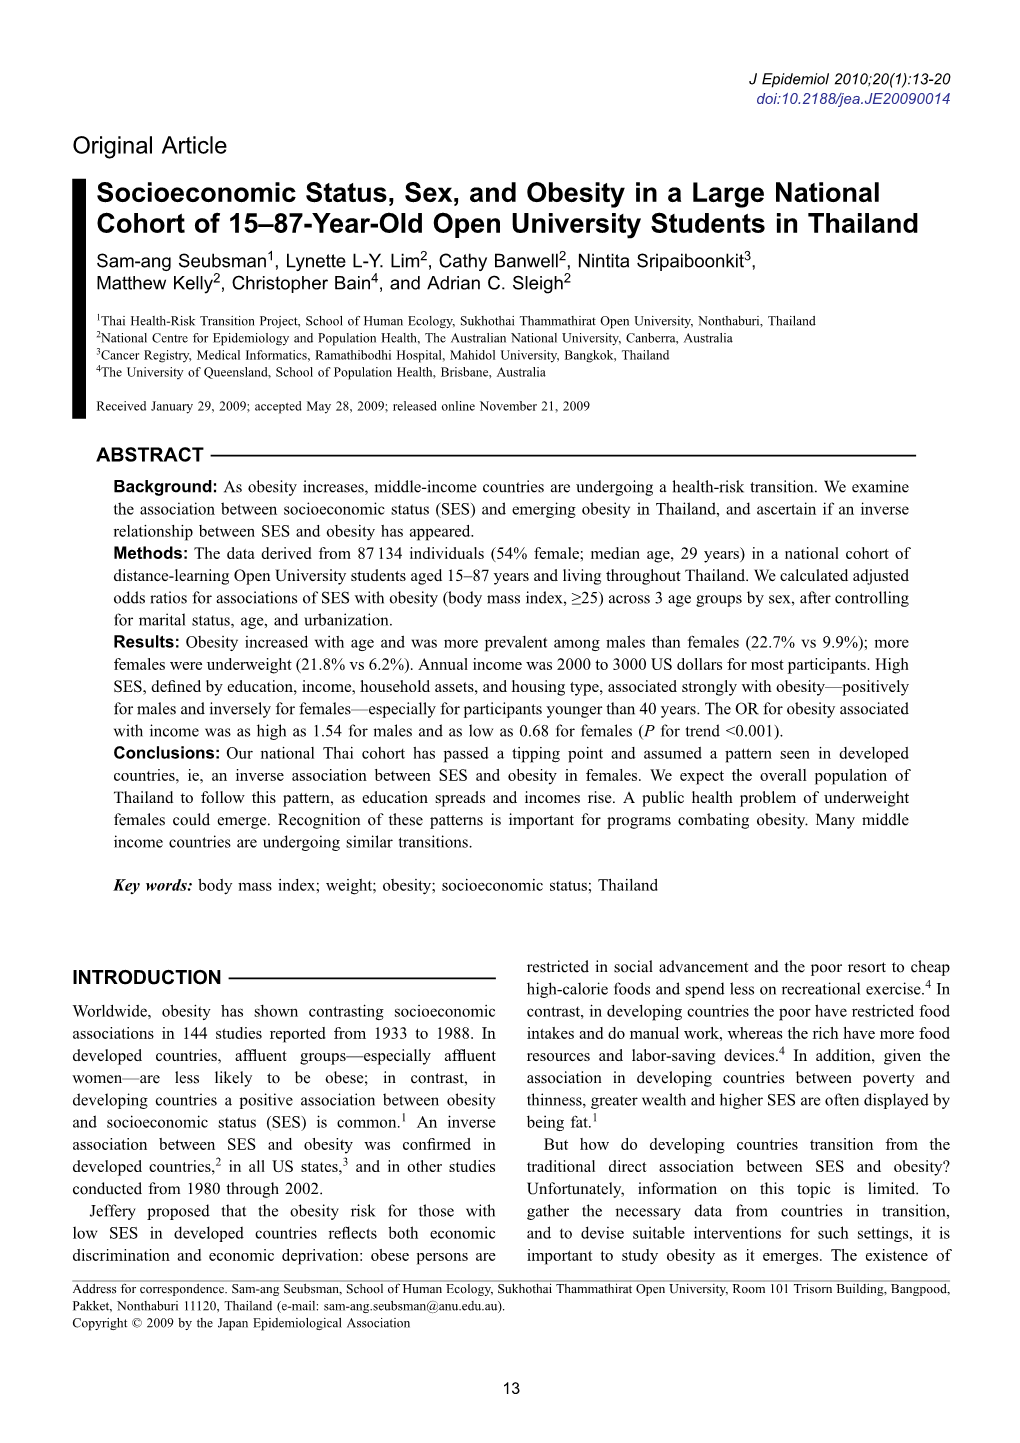 Socioeconomic Status, Sex, and Obesity in a Large National Cohort of 15–87-Year-Old Open University Students in Thailand Sam-Ang Seubsman1, Lynette L-Y